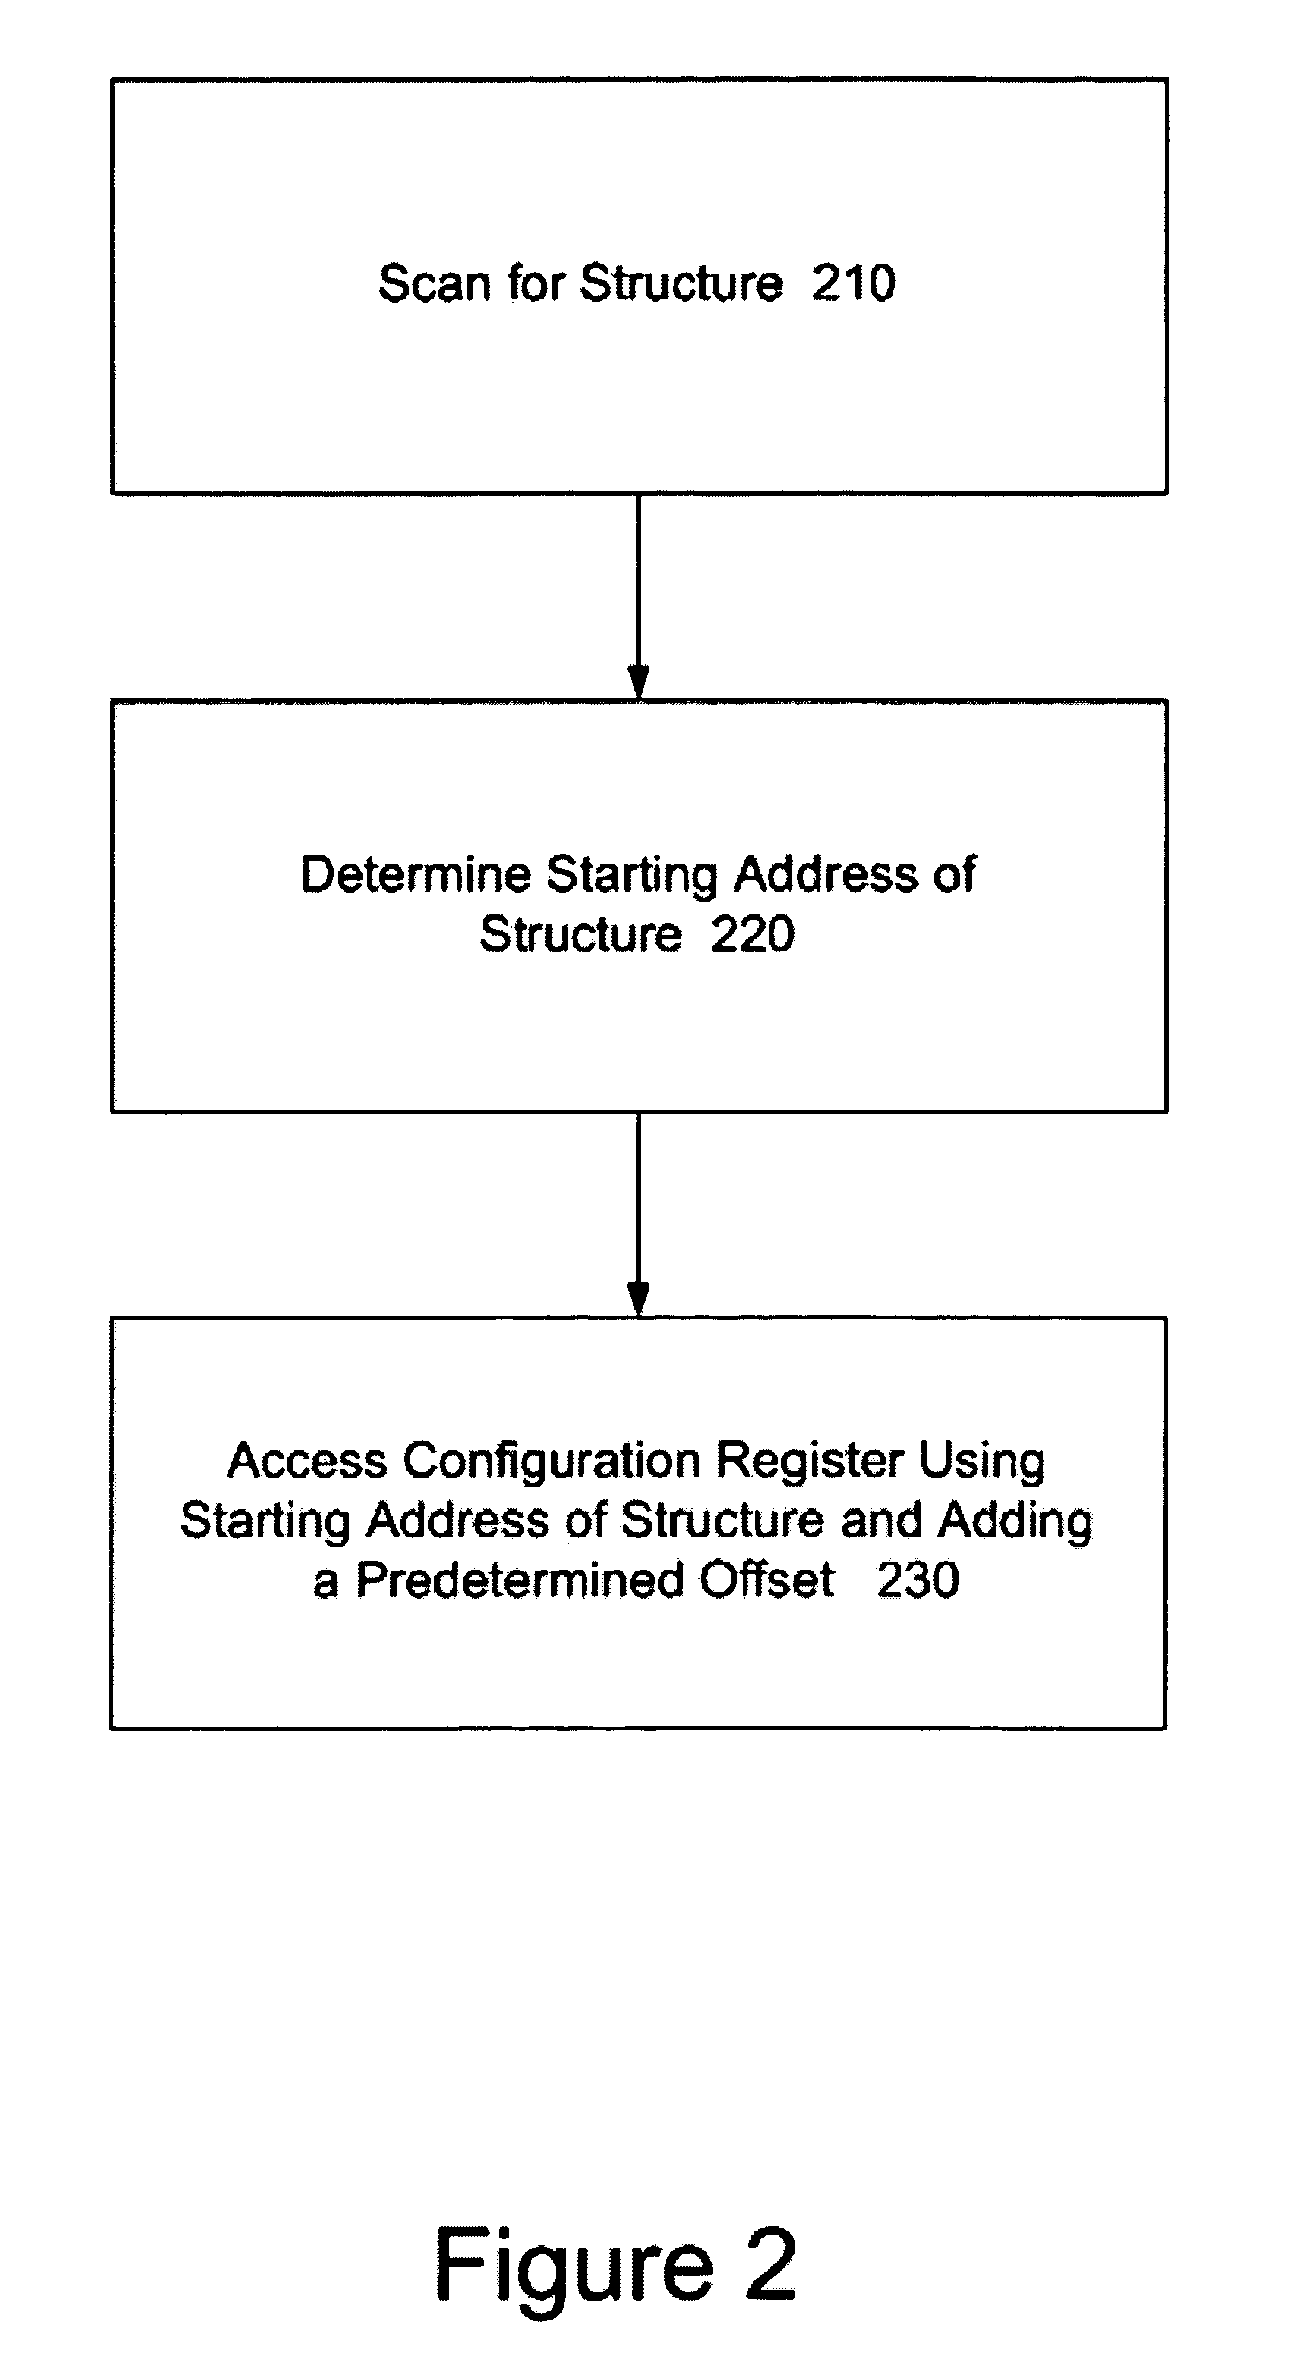 Method for addressing configuration registers by scanning for a structure in configuration space and adding a known offset